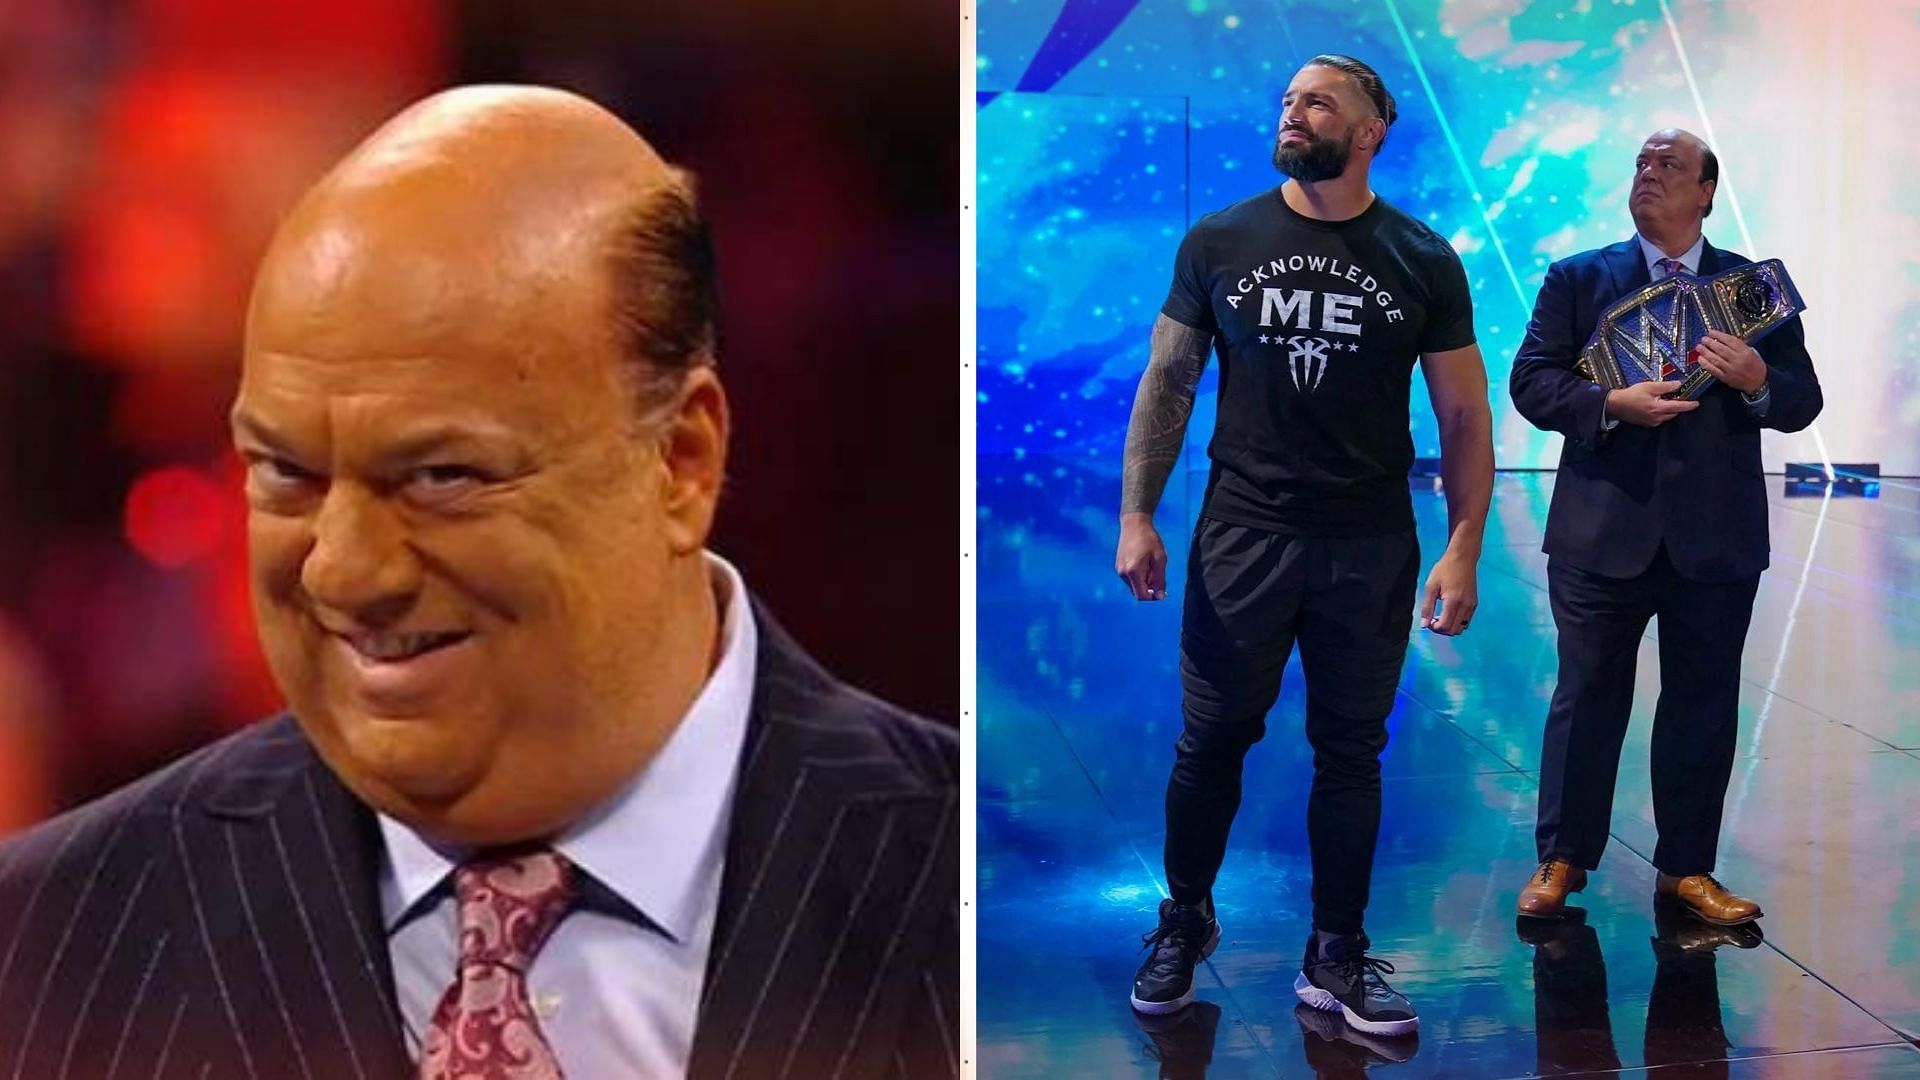 Paul Heyman has been the Special Counsel to Roman Reigns for the past couple of years